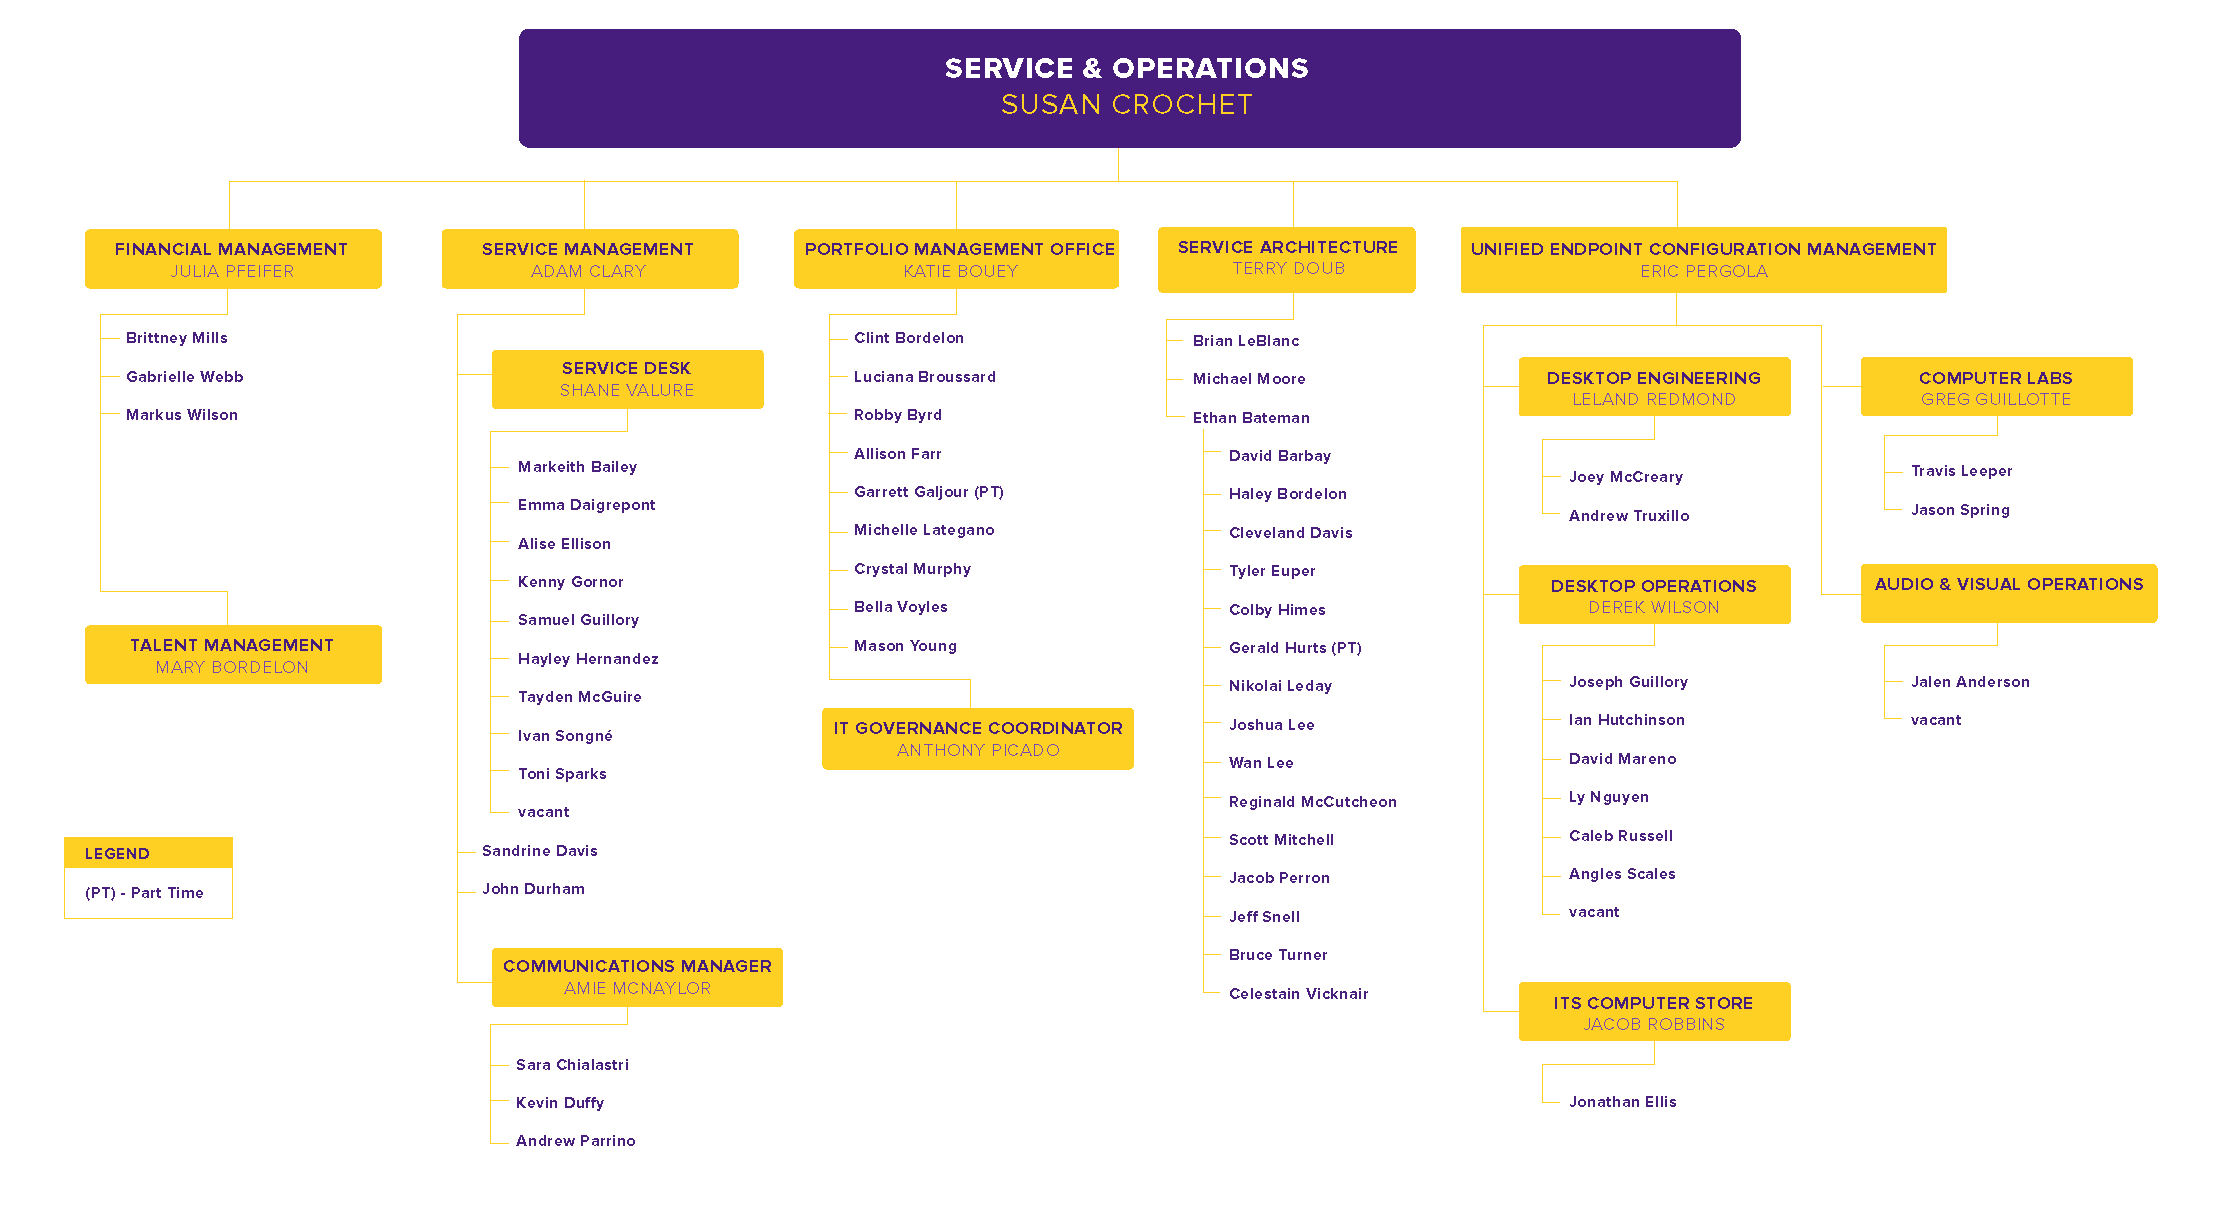 Service & Operations Org Chart, detailed in text below